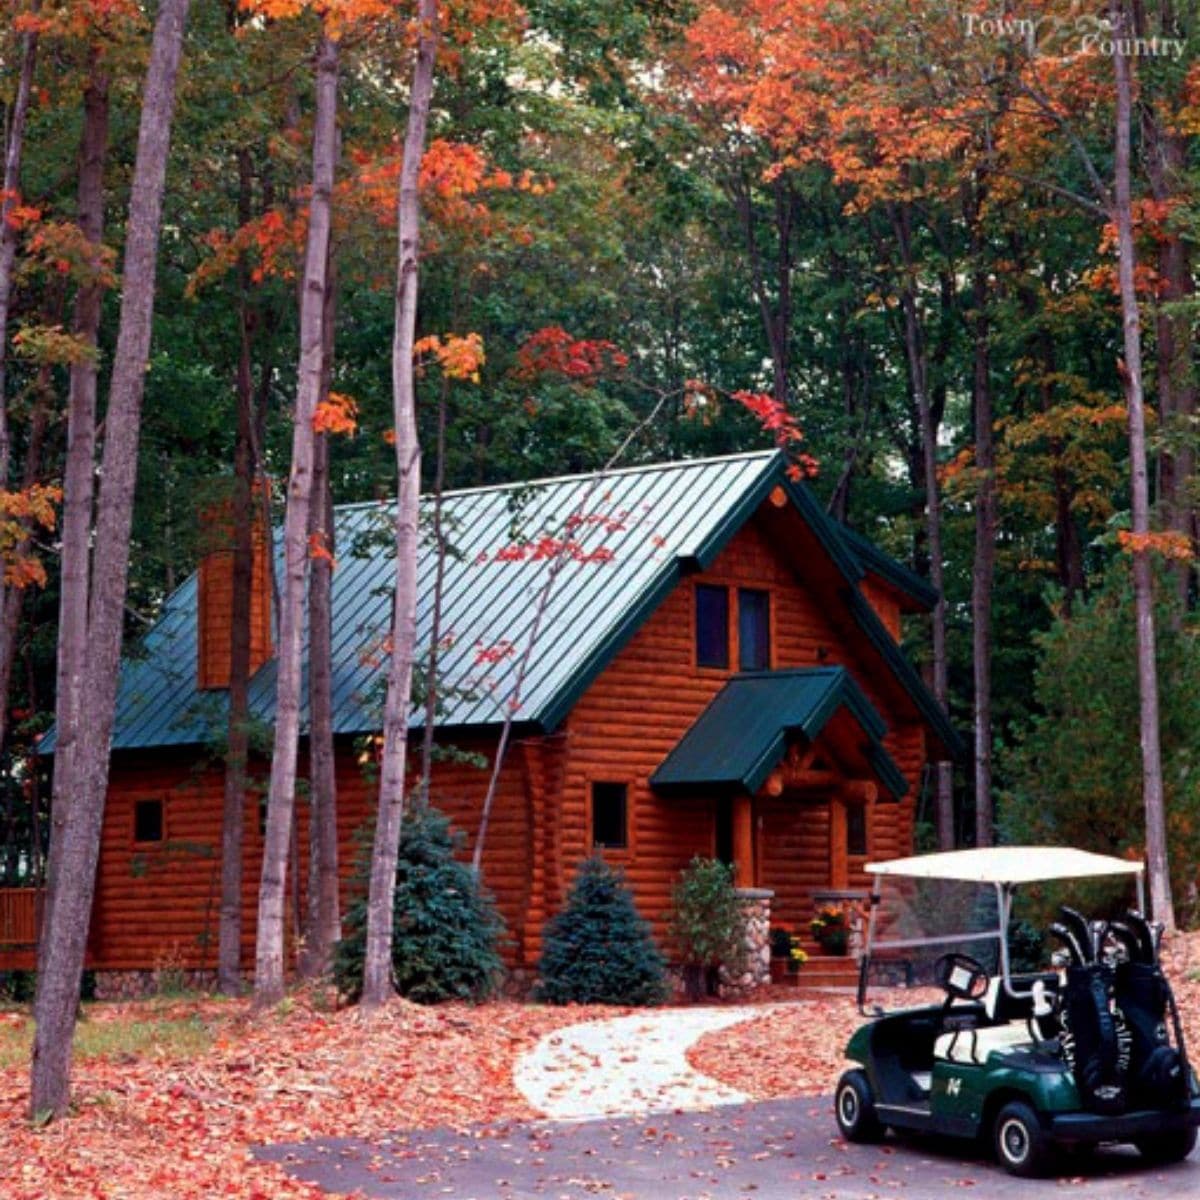 golf cart parked on drive by log cabin with green roof